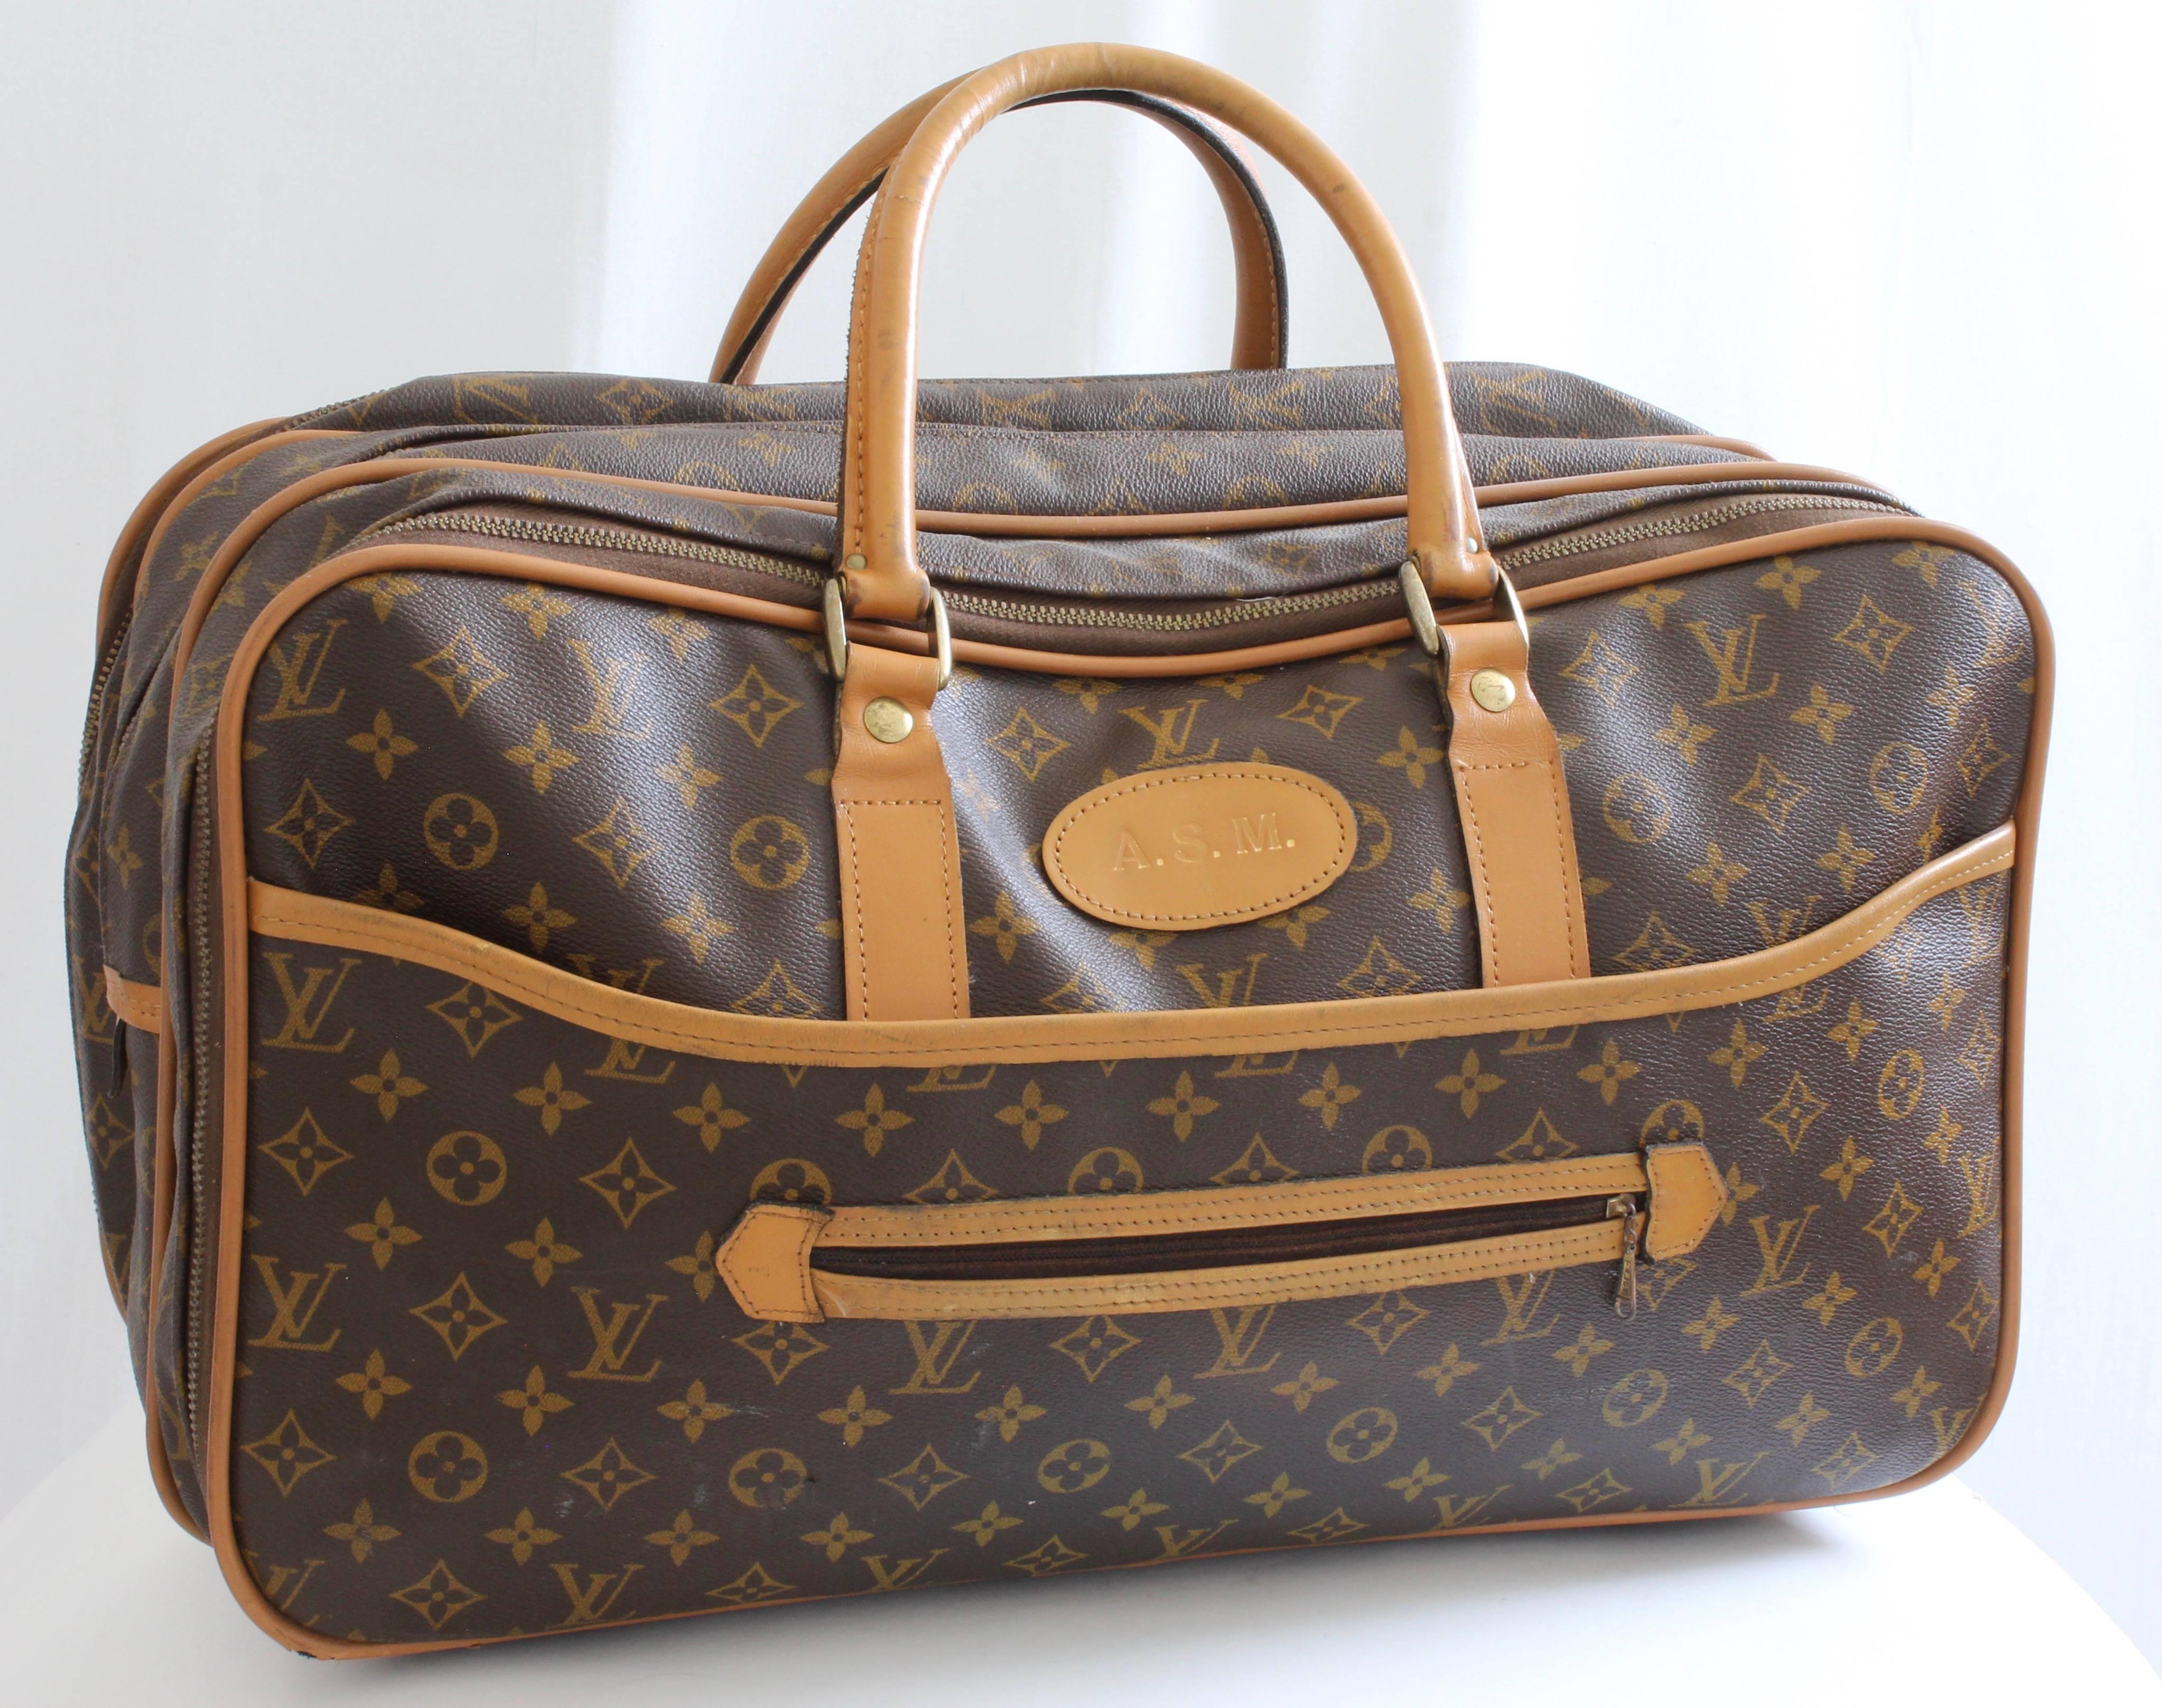 Brown Louis Vuitton Carry All Soft Side Suitcase Weekender Luggage French Company 70s 